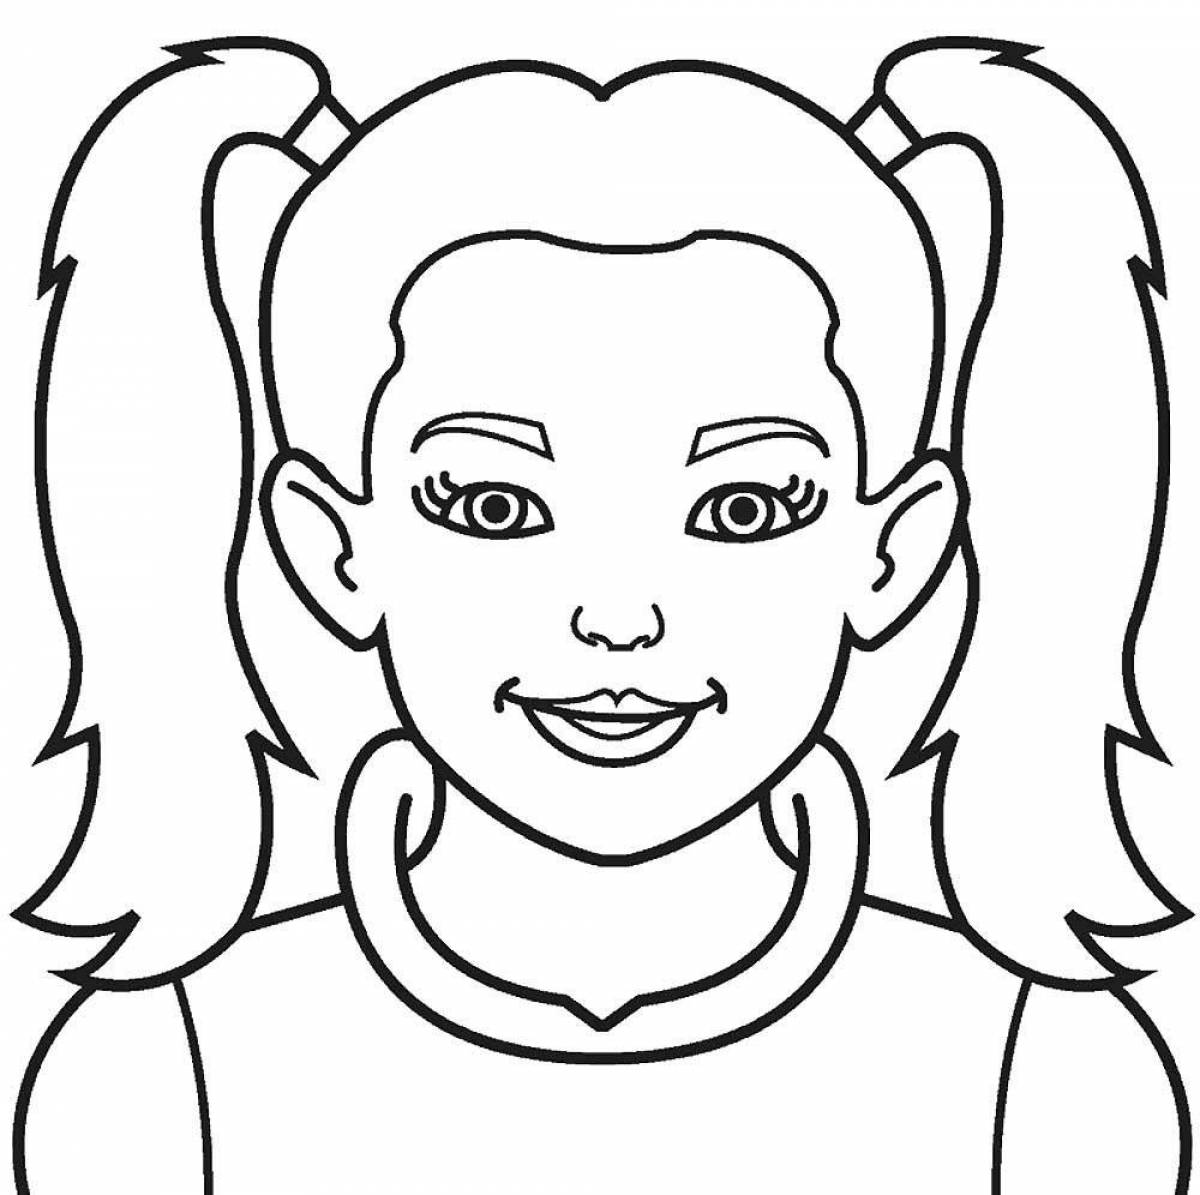 Live human face coloring page